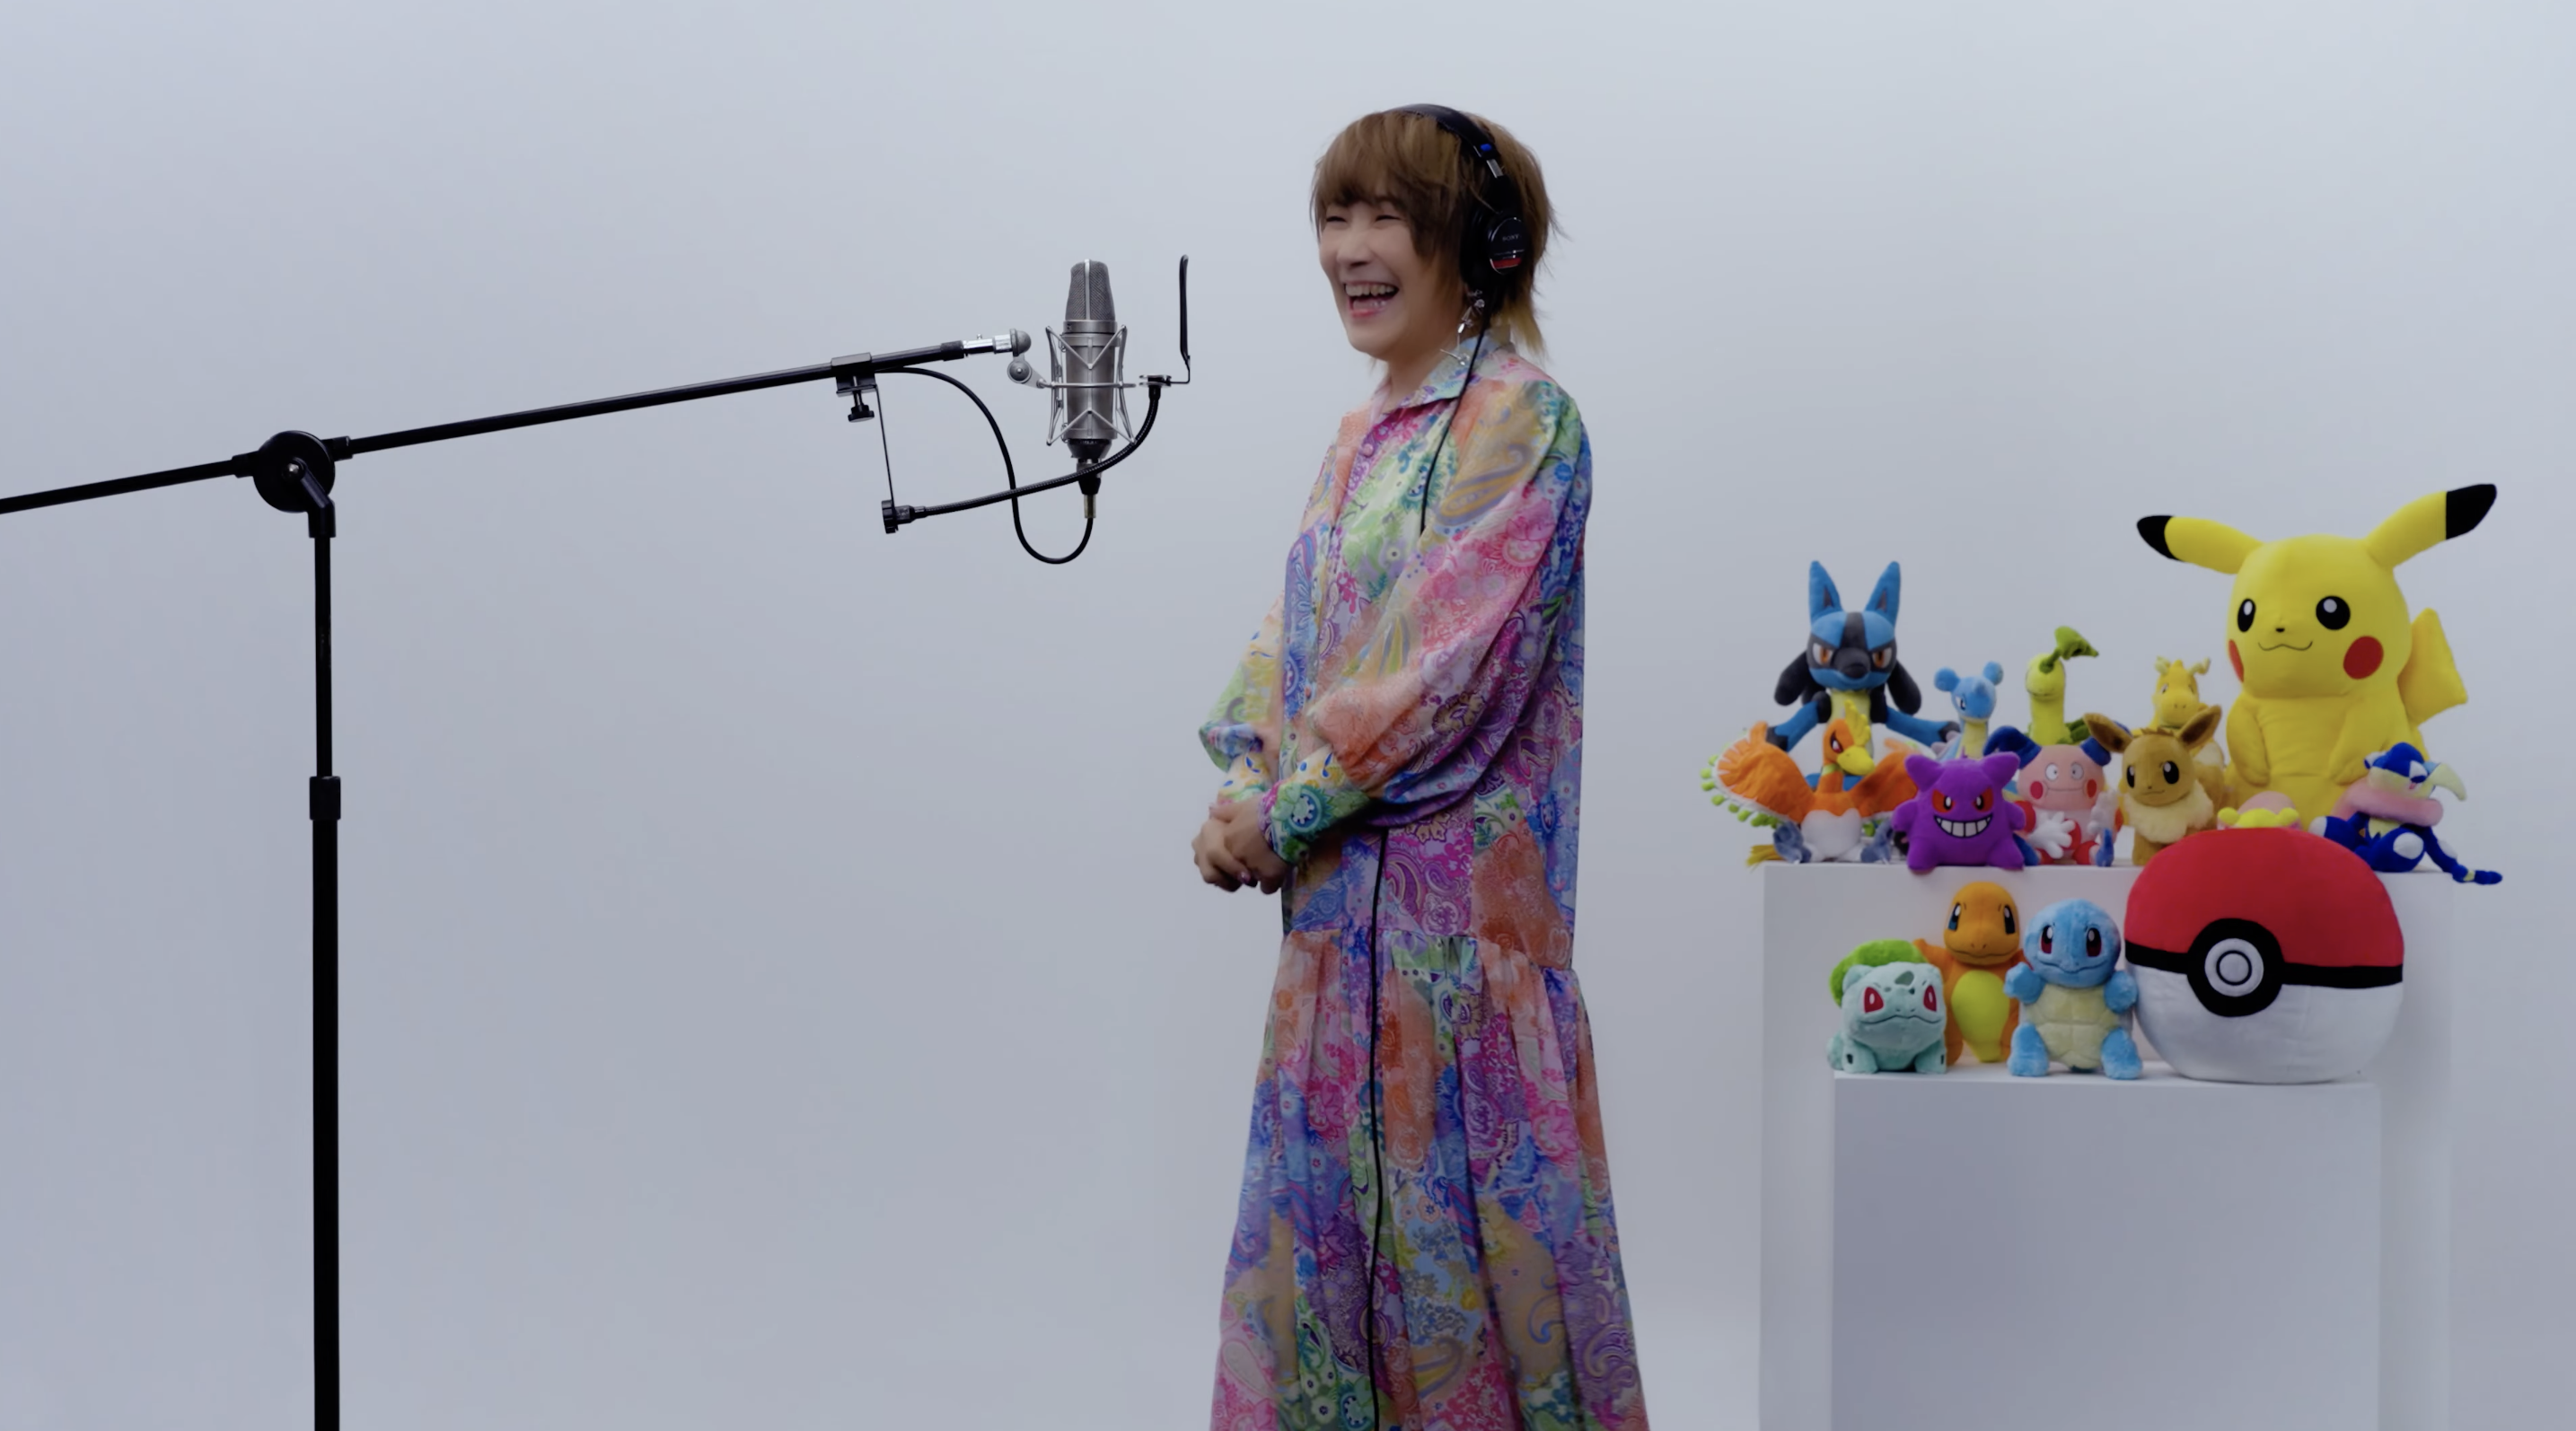 Rika Matsumoto signing on a bare white set. She’s smiling. The only thing on set is a collection of Pokémon plushies like Pikachu, Squirtle, and the other starter  Pokémon.